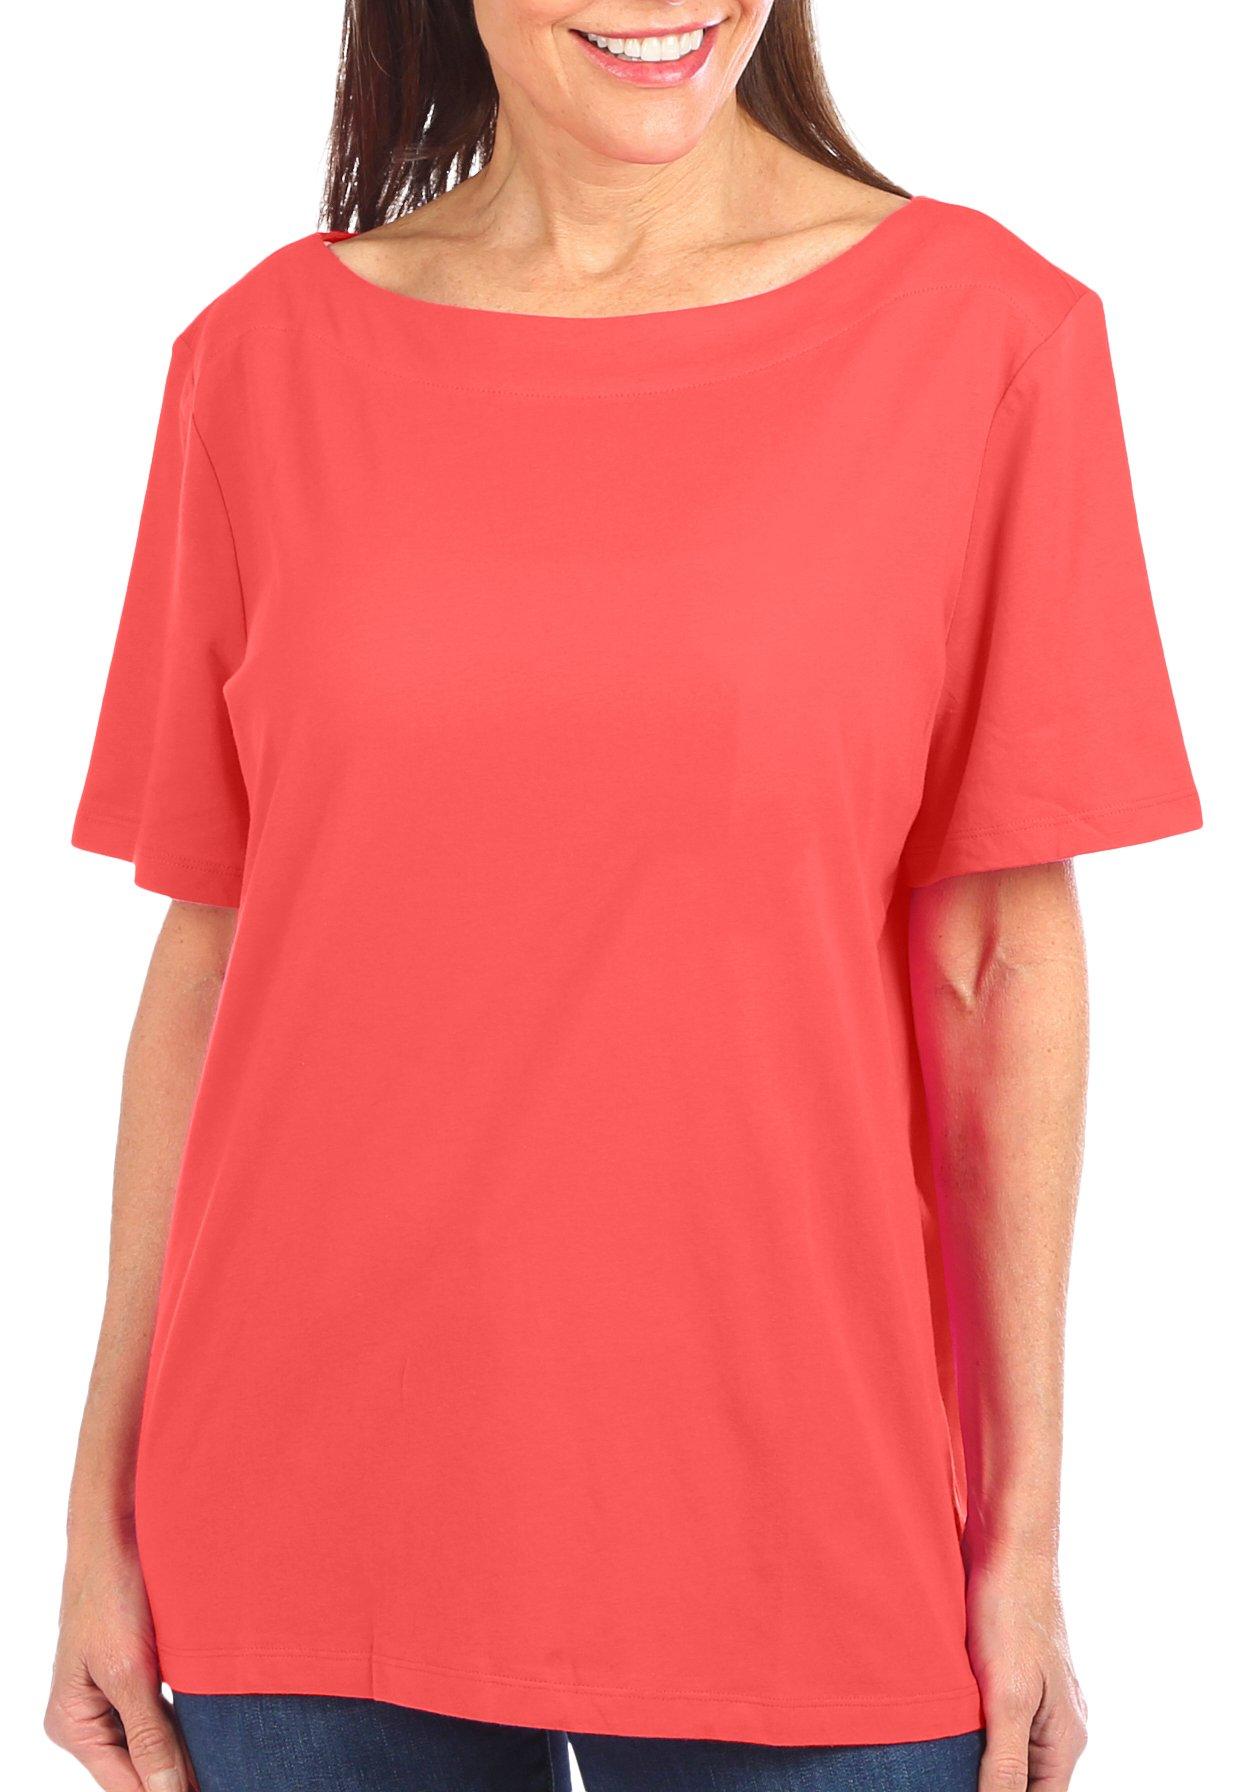 Petite Solid Boat Neck Short Sleeve Top